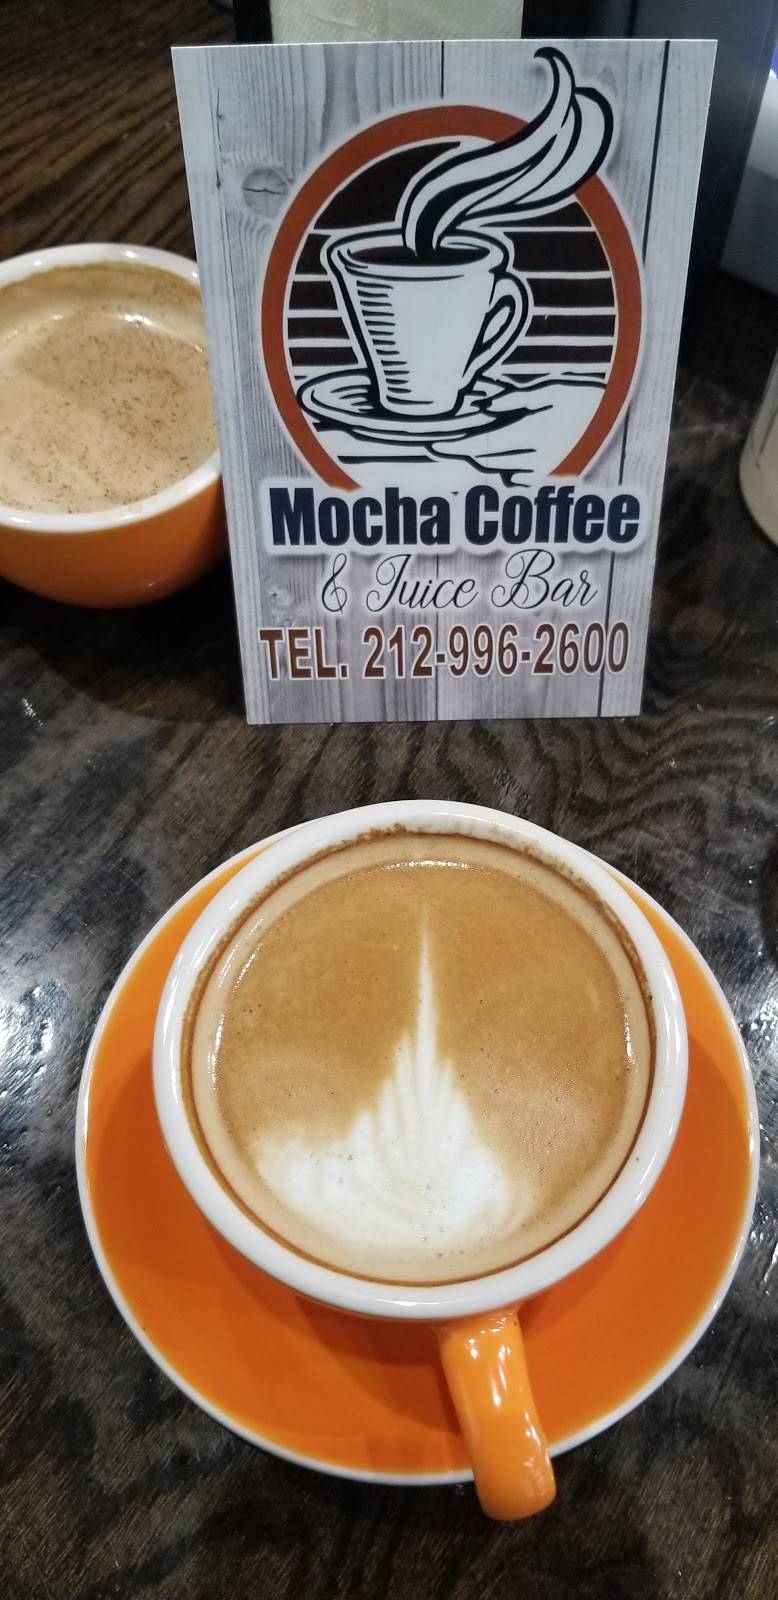 Mocha Coffee, Juice Bar & Fried Chicken | meal takeaway | 203 E 121st St, New York, NY 10035, USA | 2129962600 OR +1 212-996-2600